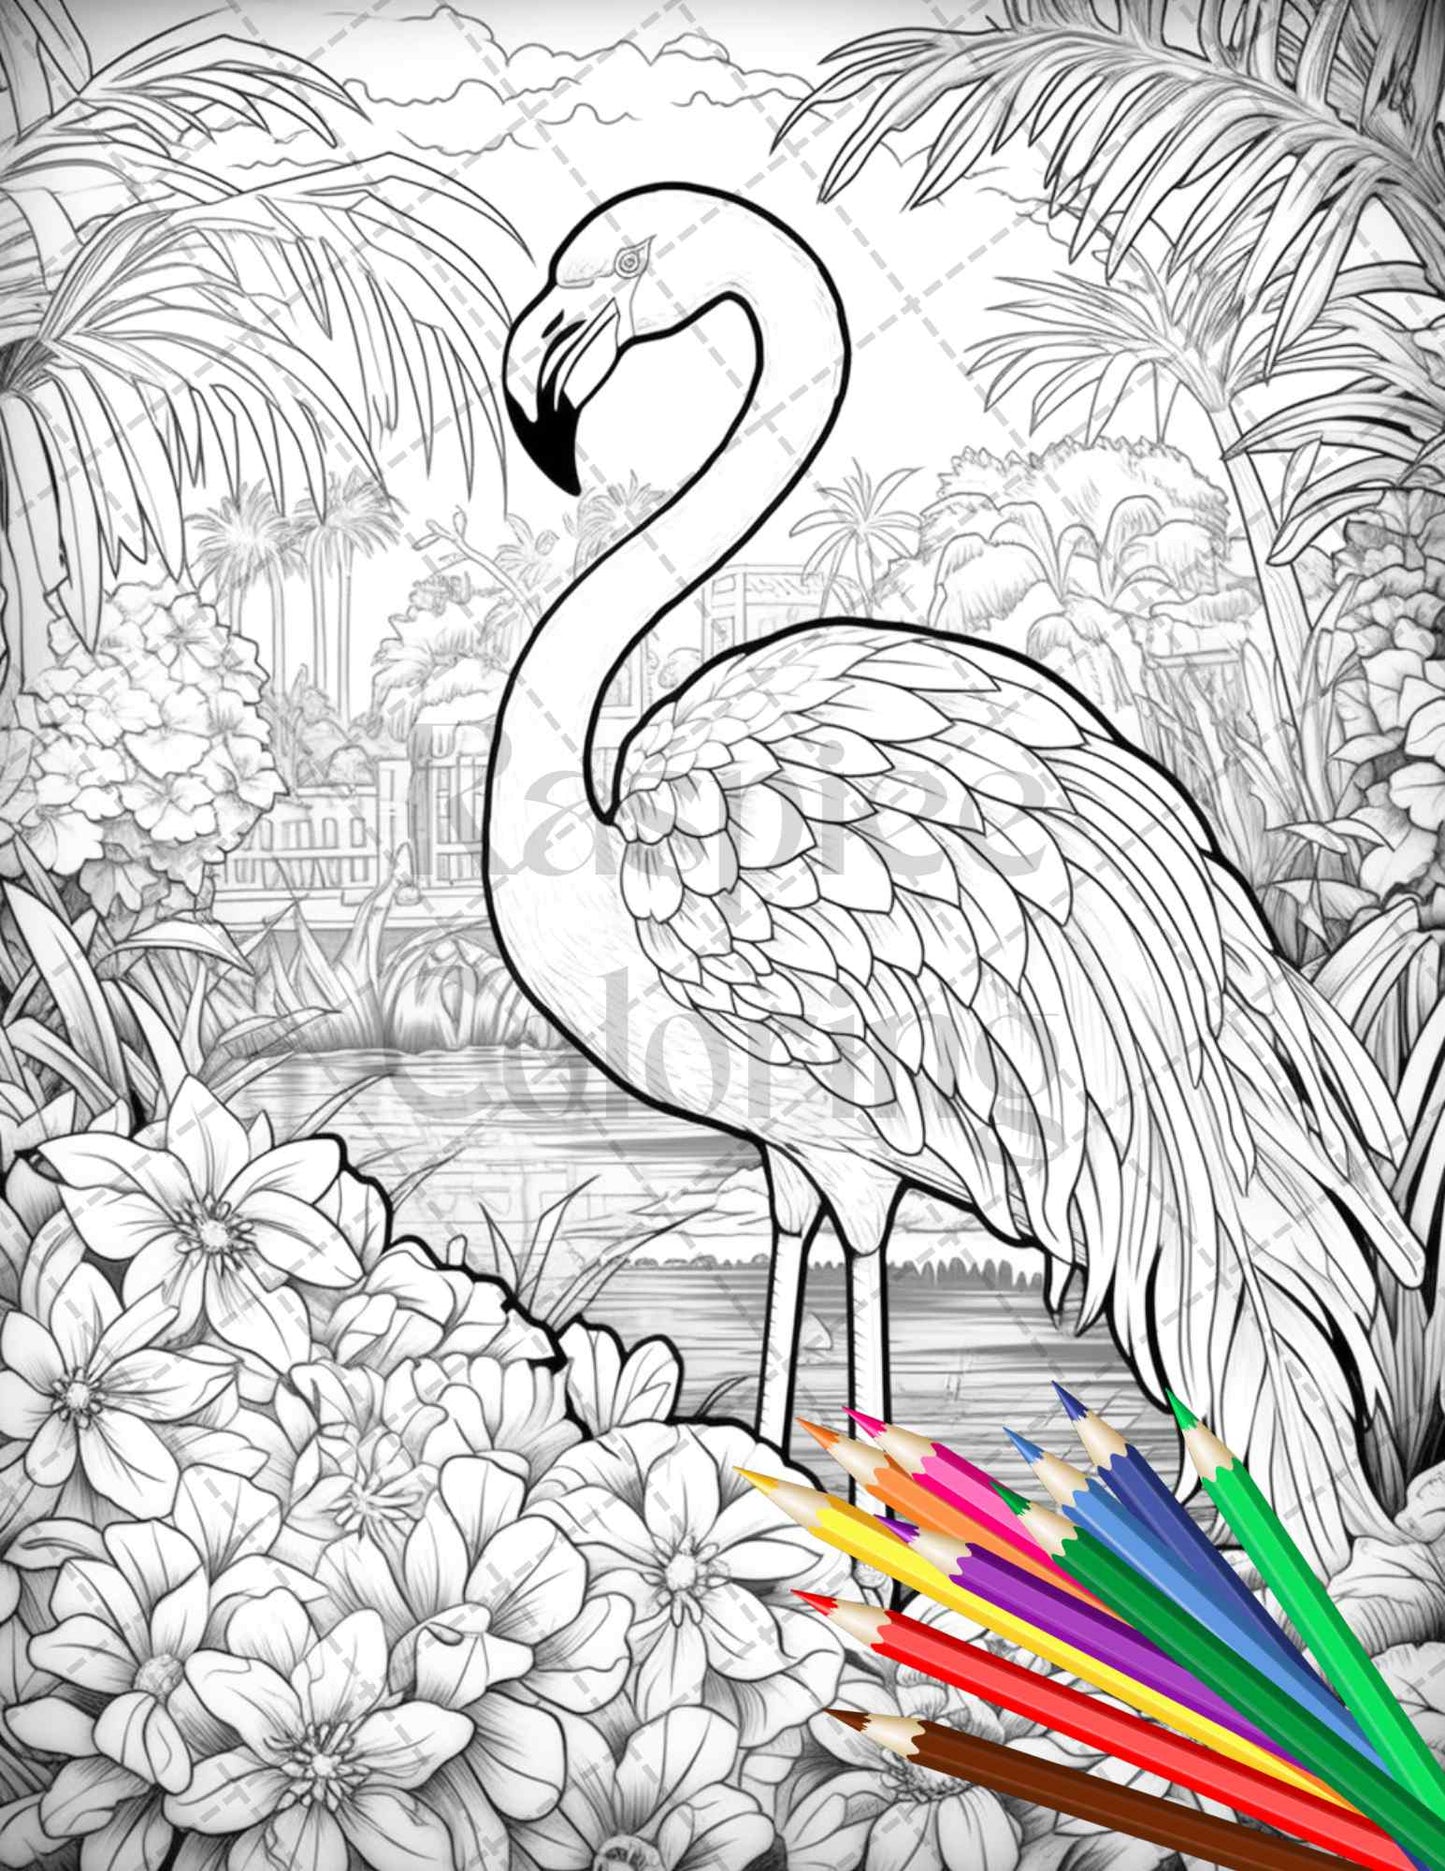 Flamingo Oasis Grayscale Coloring Pages Printable for Adults, detailed grayscale artwork, stress relief coloring, black and white coloring book, printable animal illustrations, relaxing nature theme coloring pages